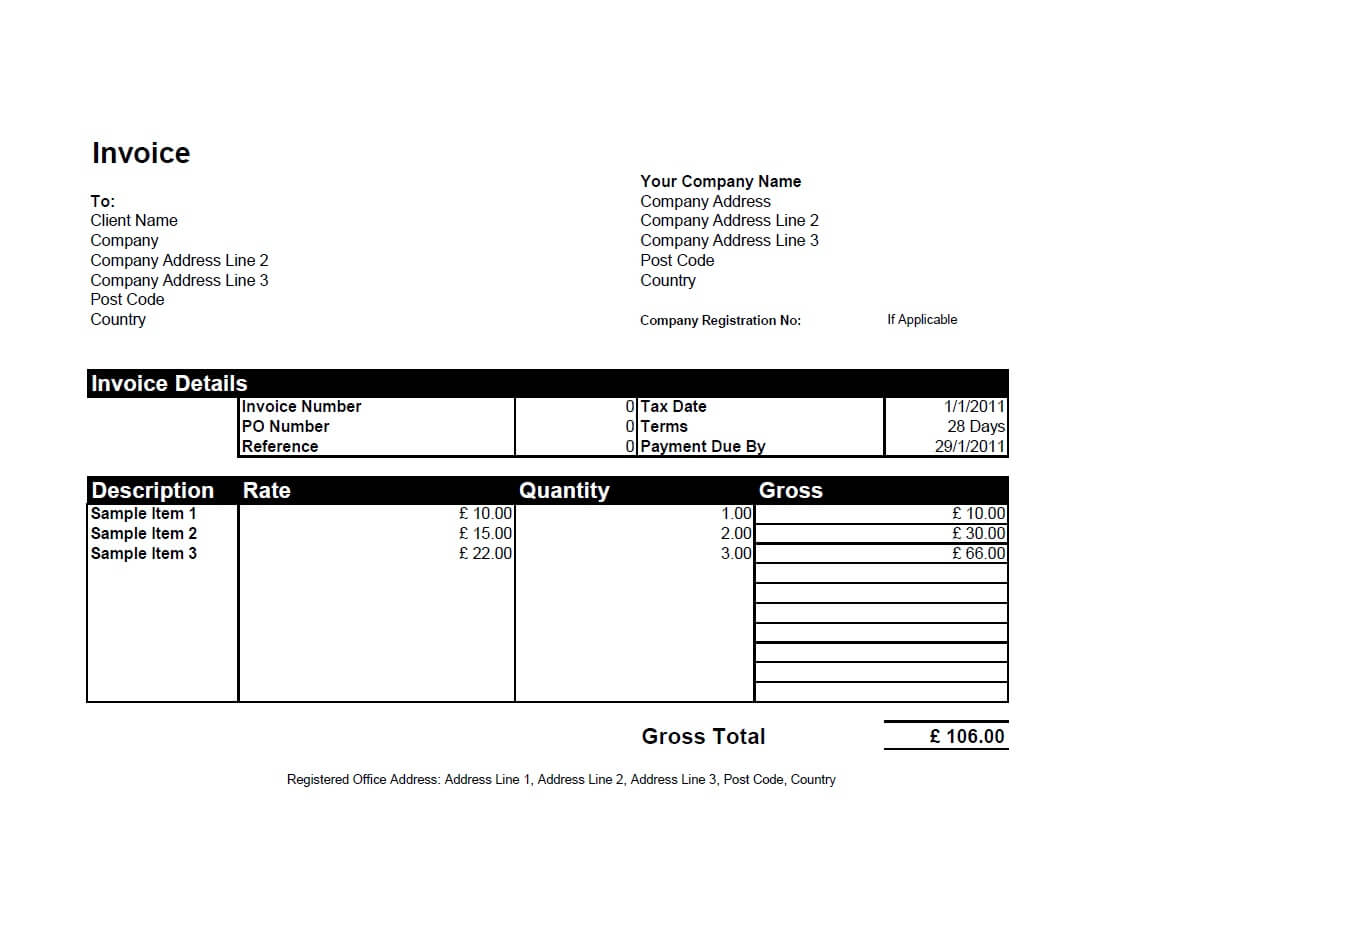 Excel Spreadsheet Invoice throughout Free Invoice Templates For Word, Excel, Open Office  Invoiceberry